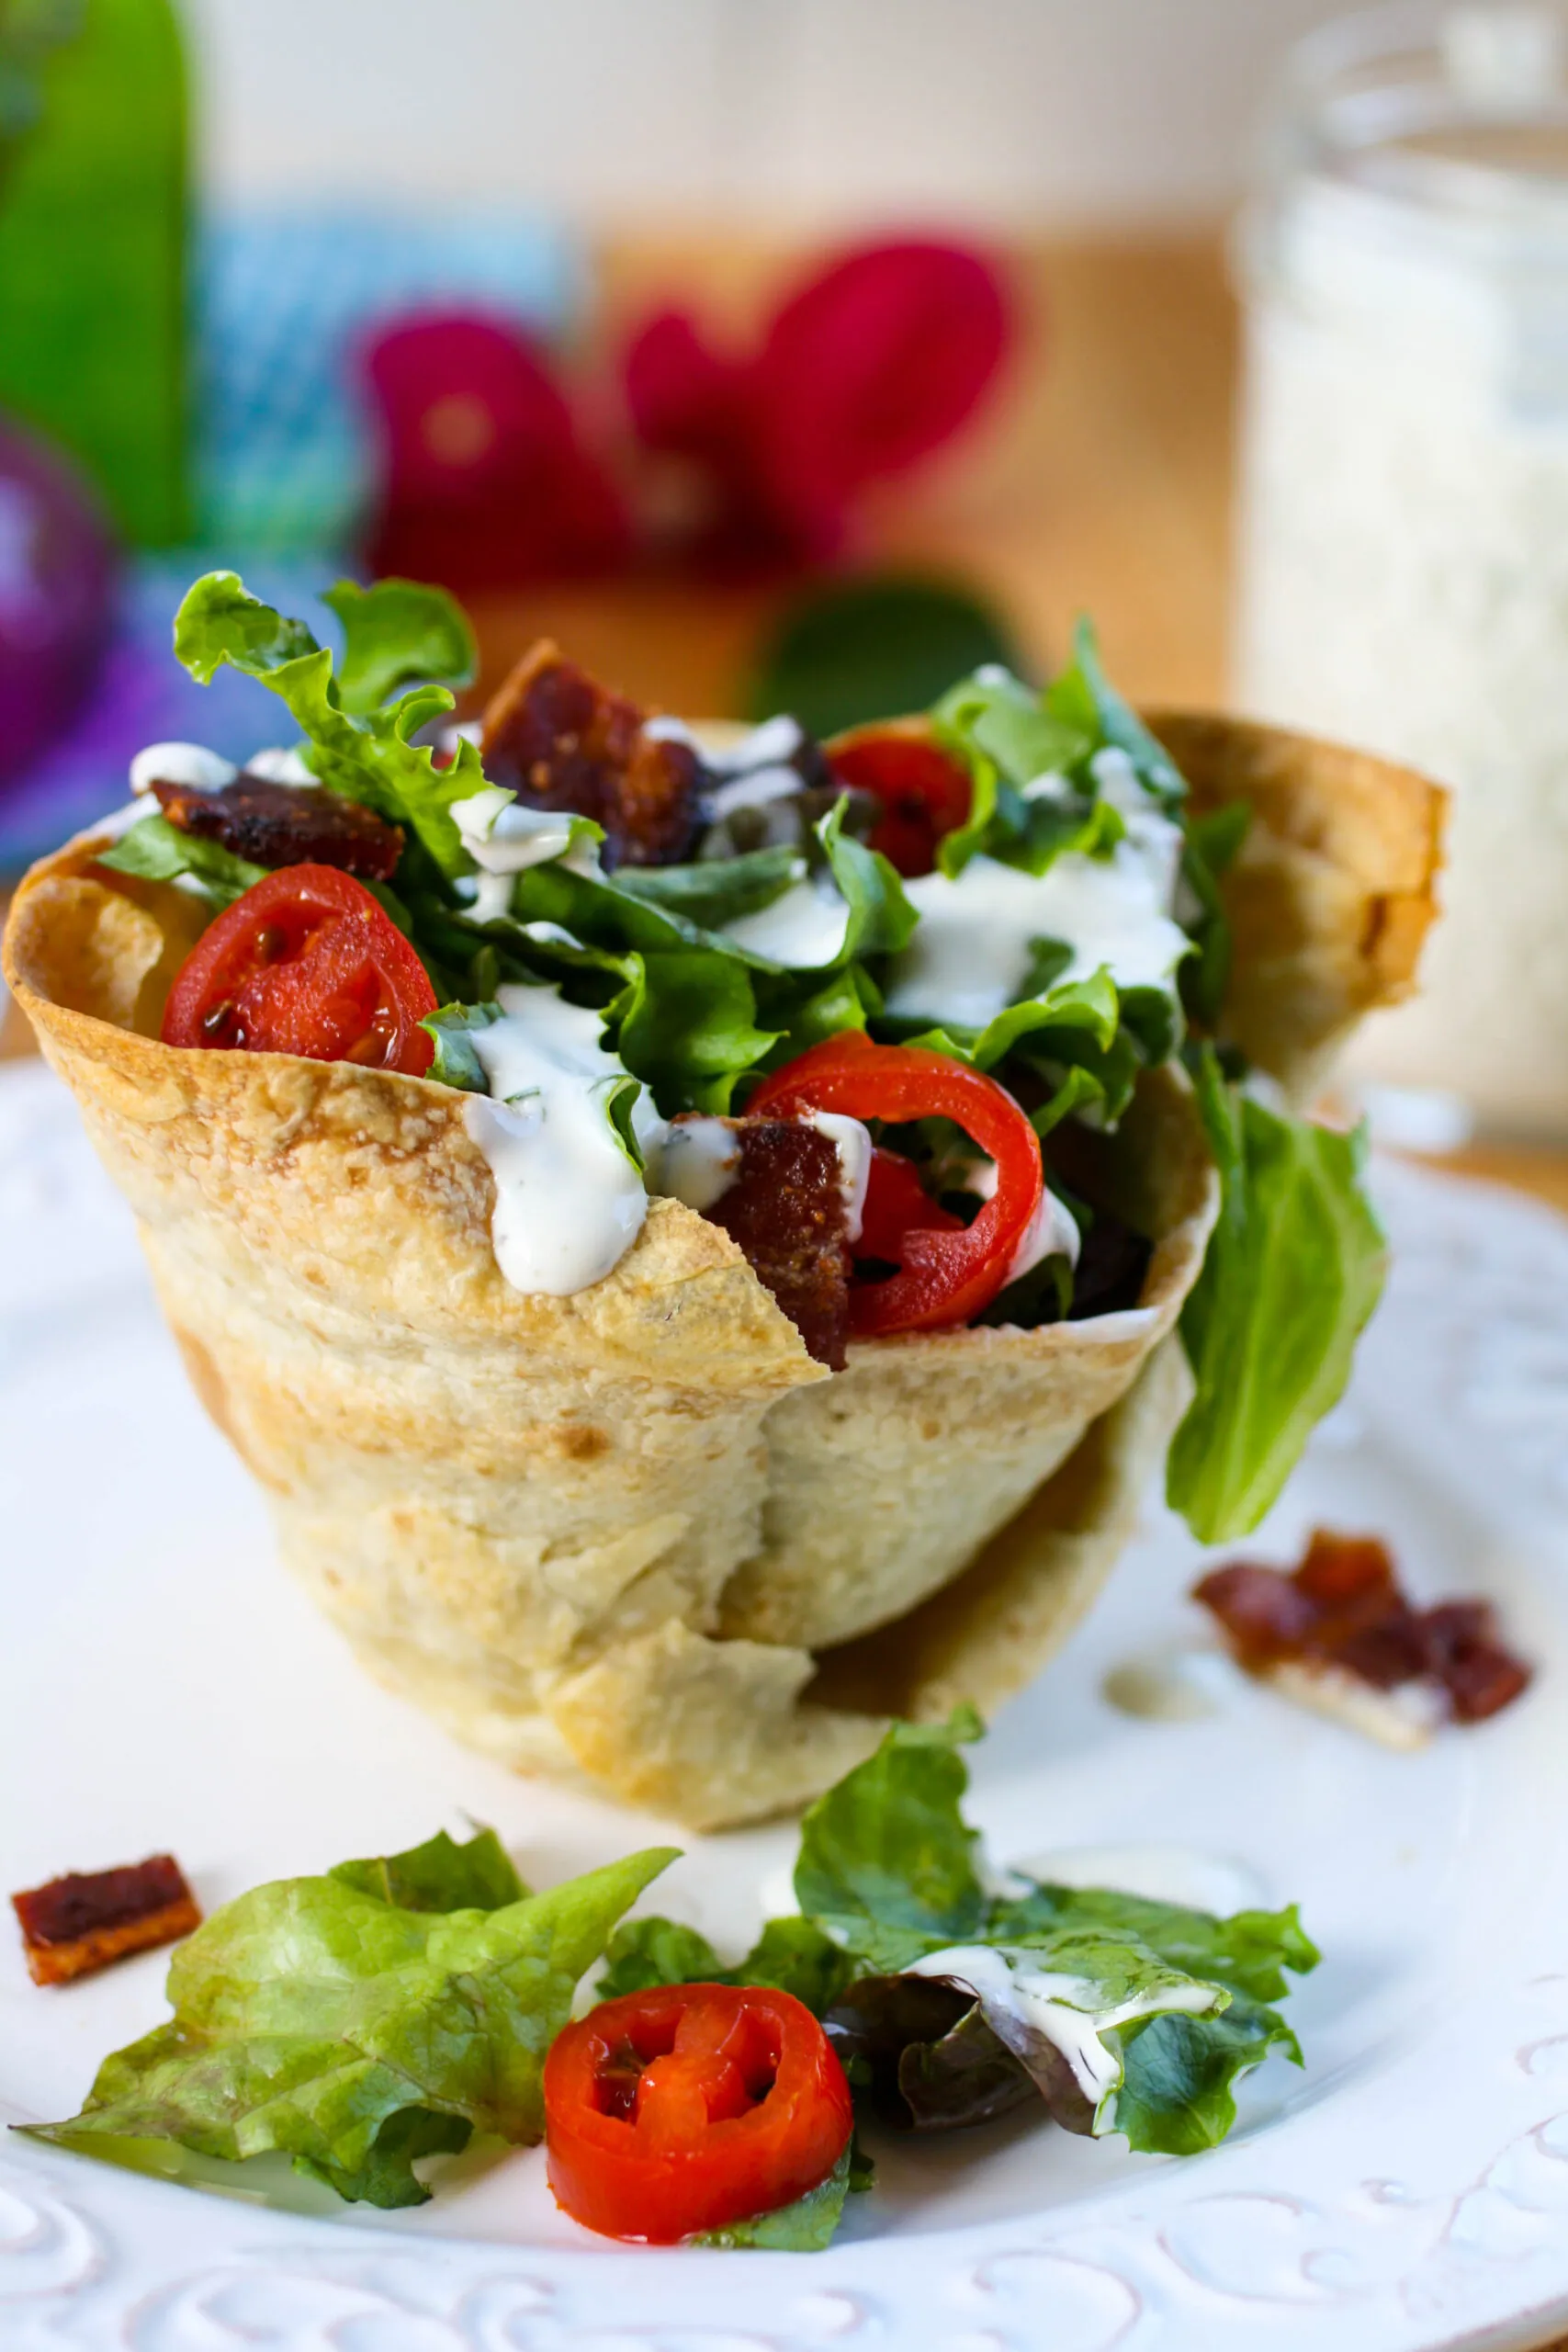 Side Salad in Tortilla Cups with Ranch Dressing is fun for a tasty, lighter meal.